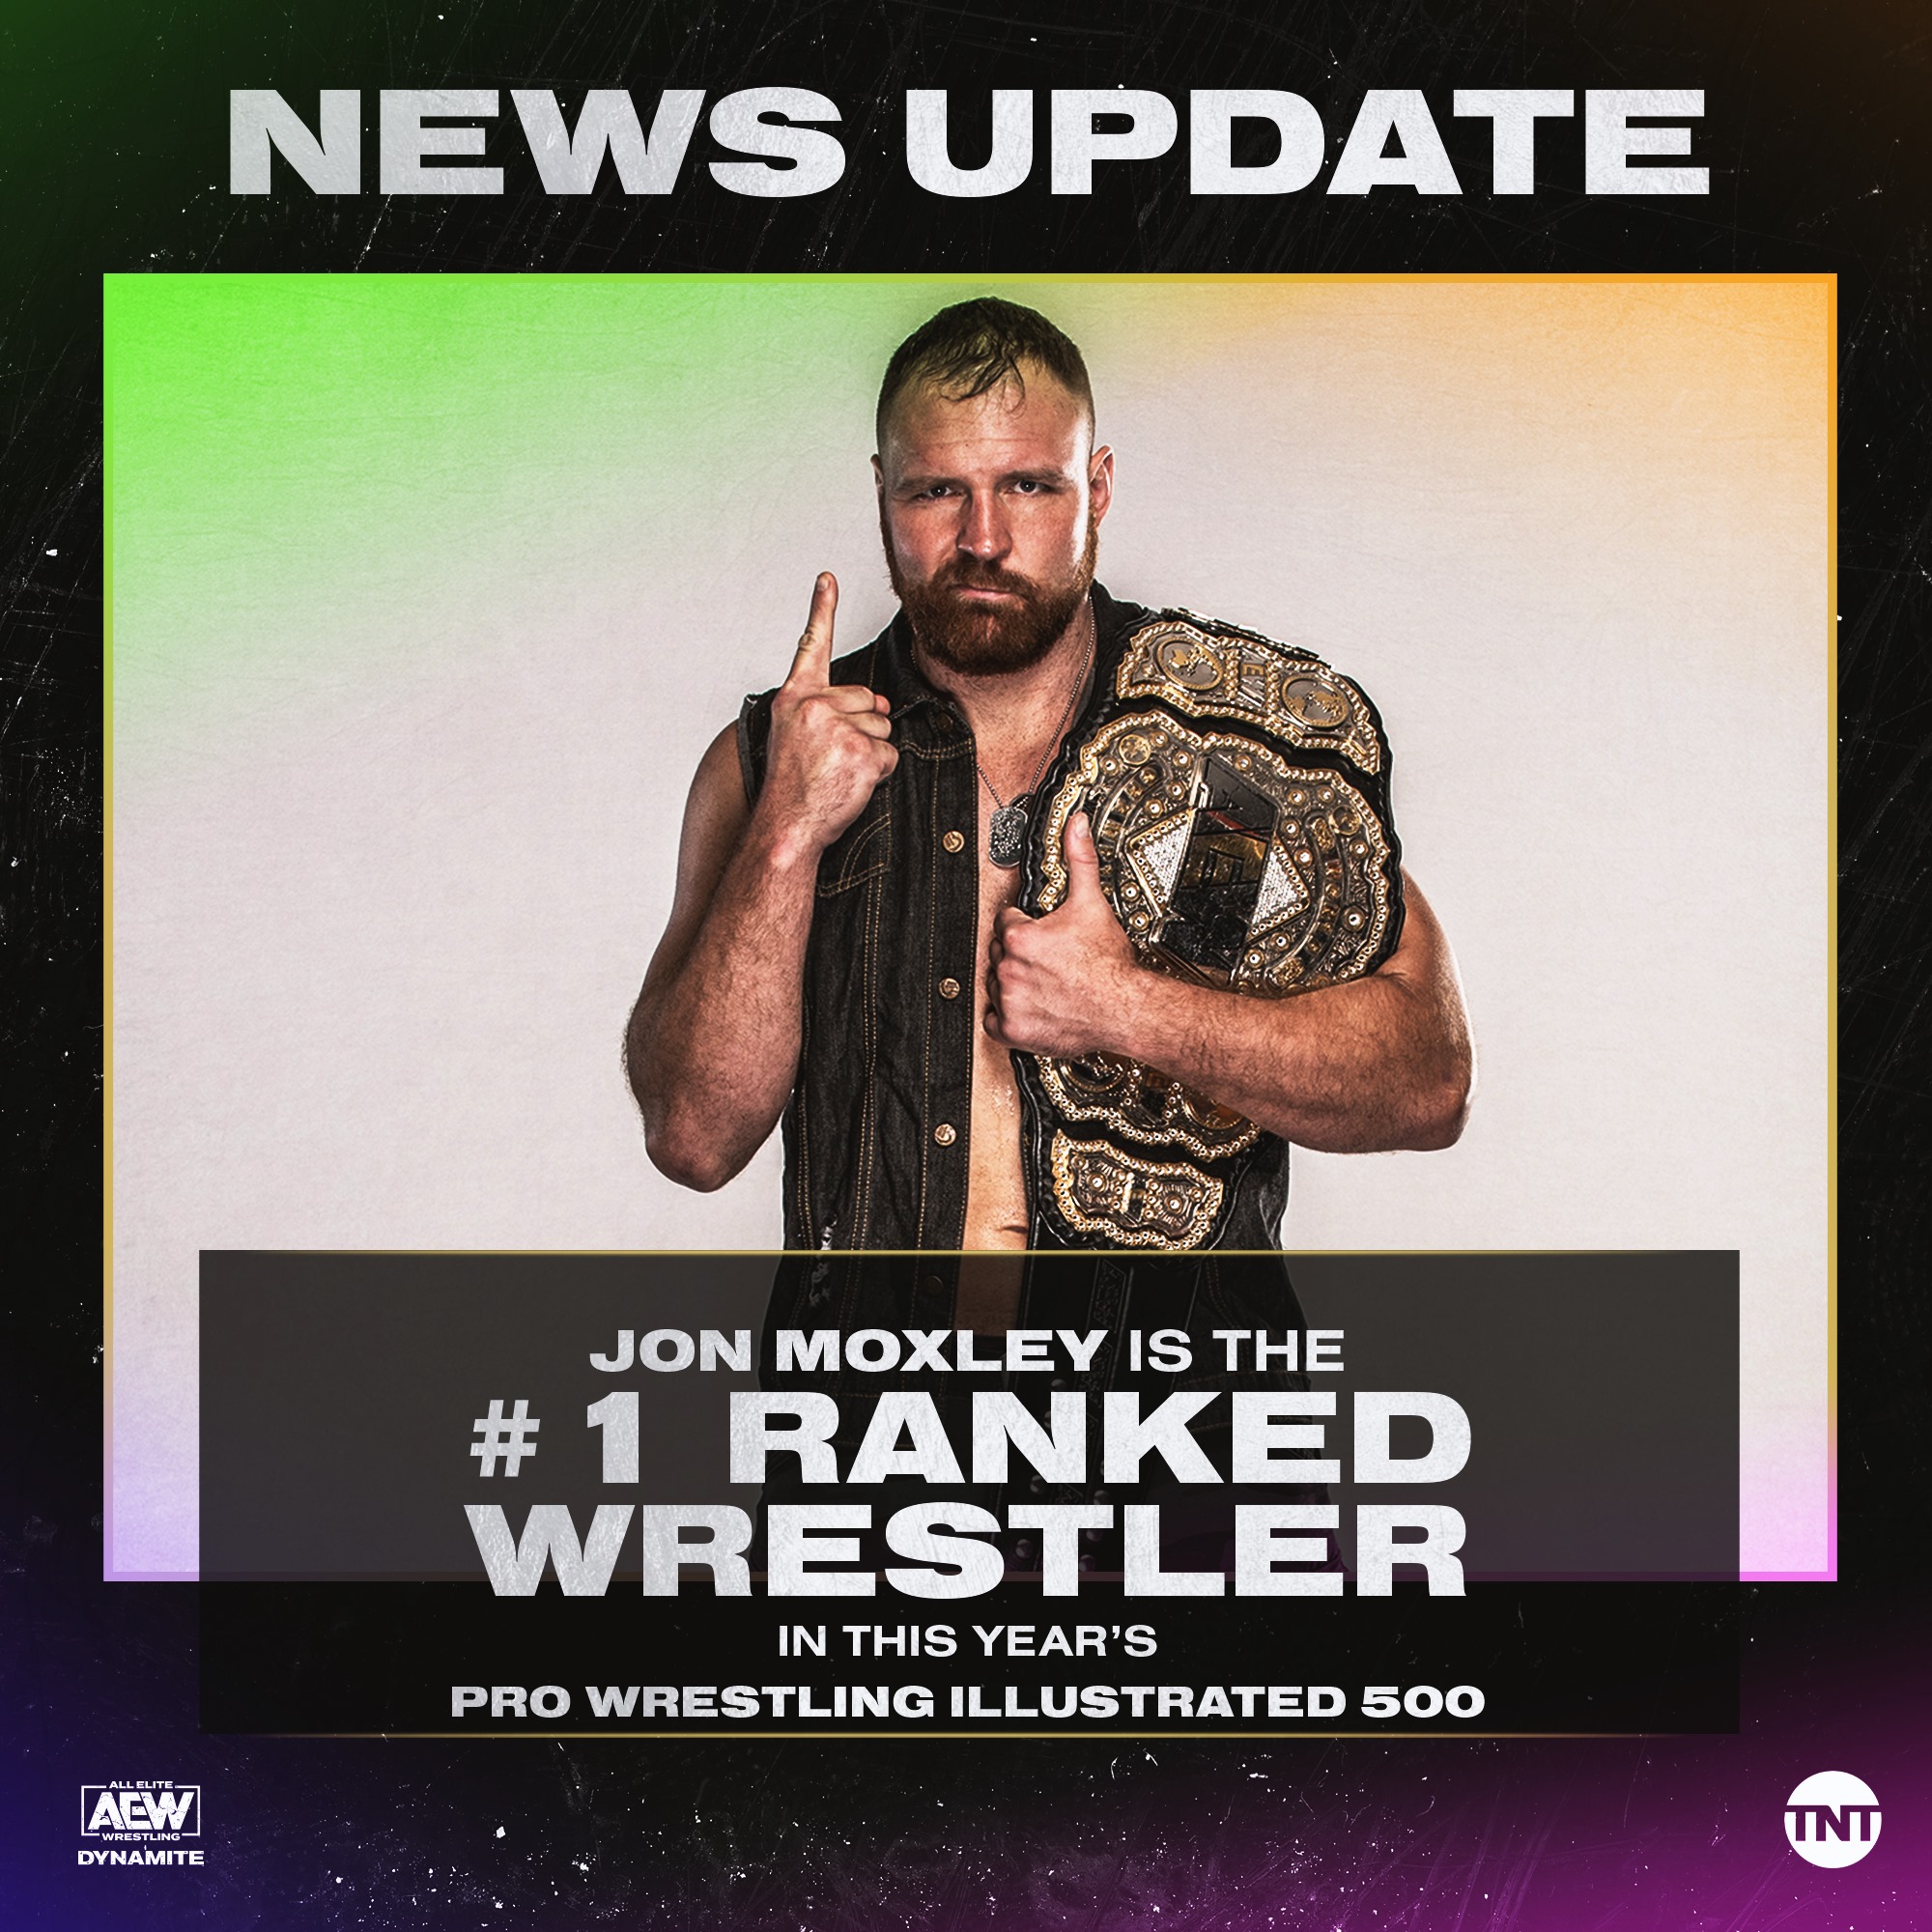 arm - News Update Jon Moxley Is The Ranked Wrestler In This Year'S Pro Wrestling Illustrated 500 Aew Unt Oynamite